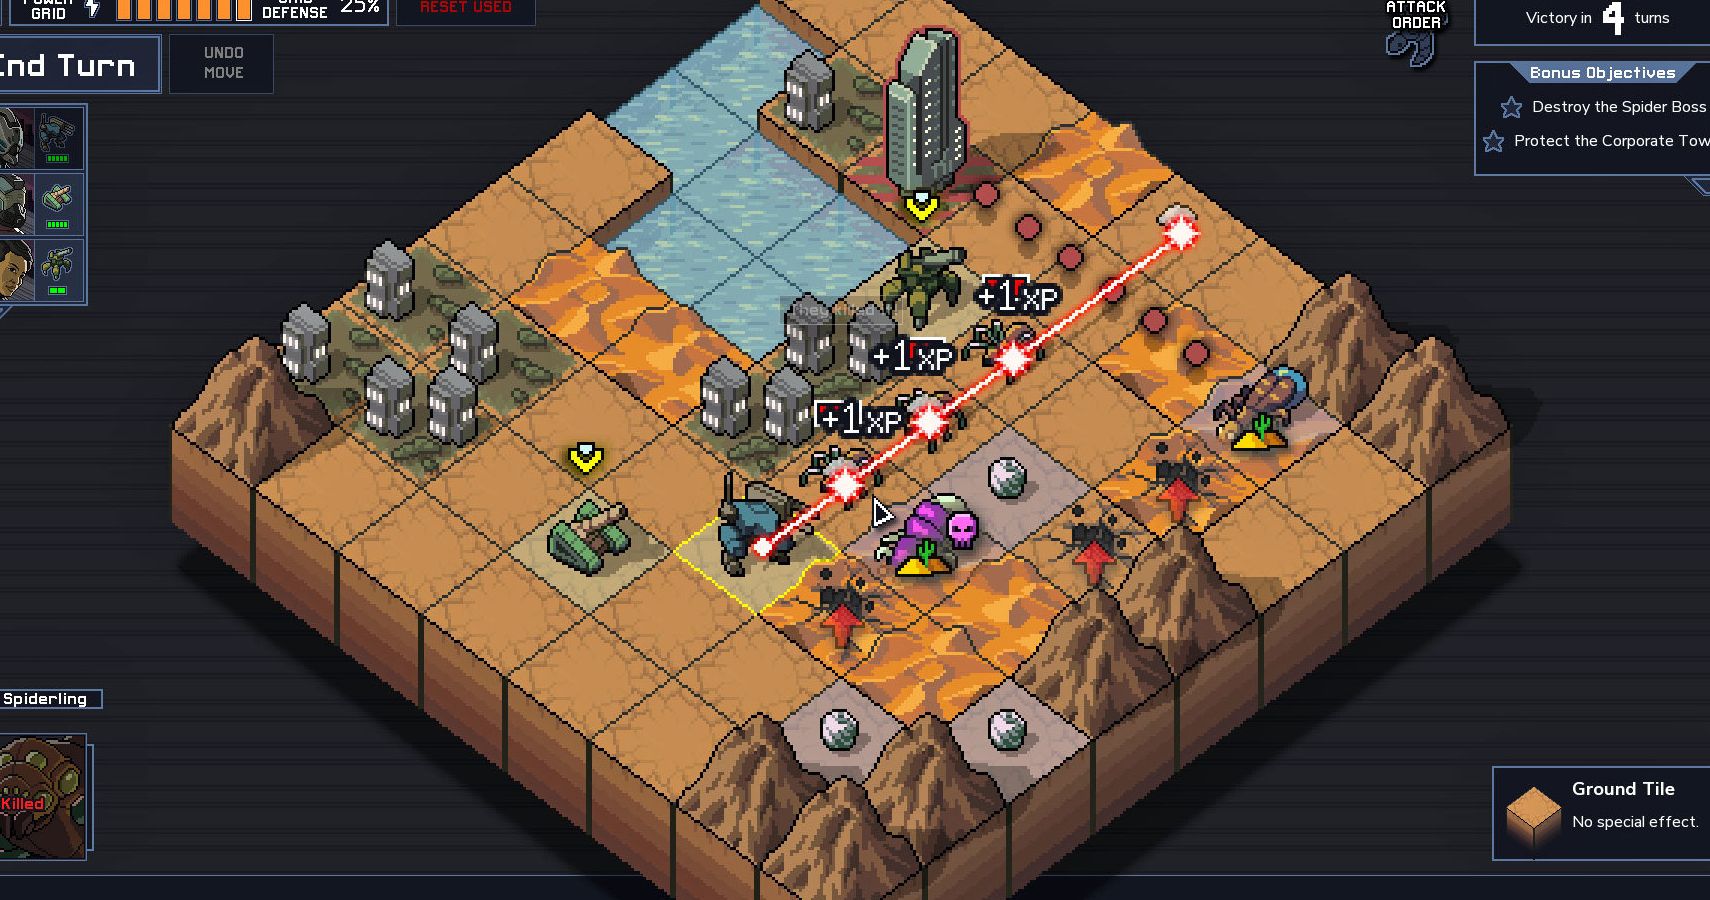 Epic Kicks Off Its Free Game Giveaway With Into The Breach